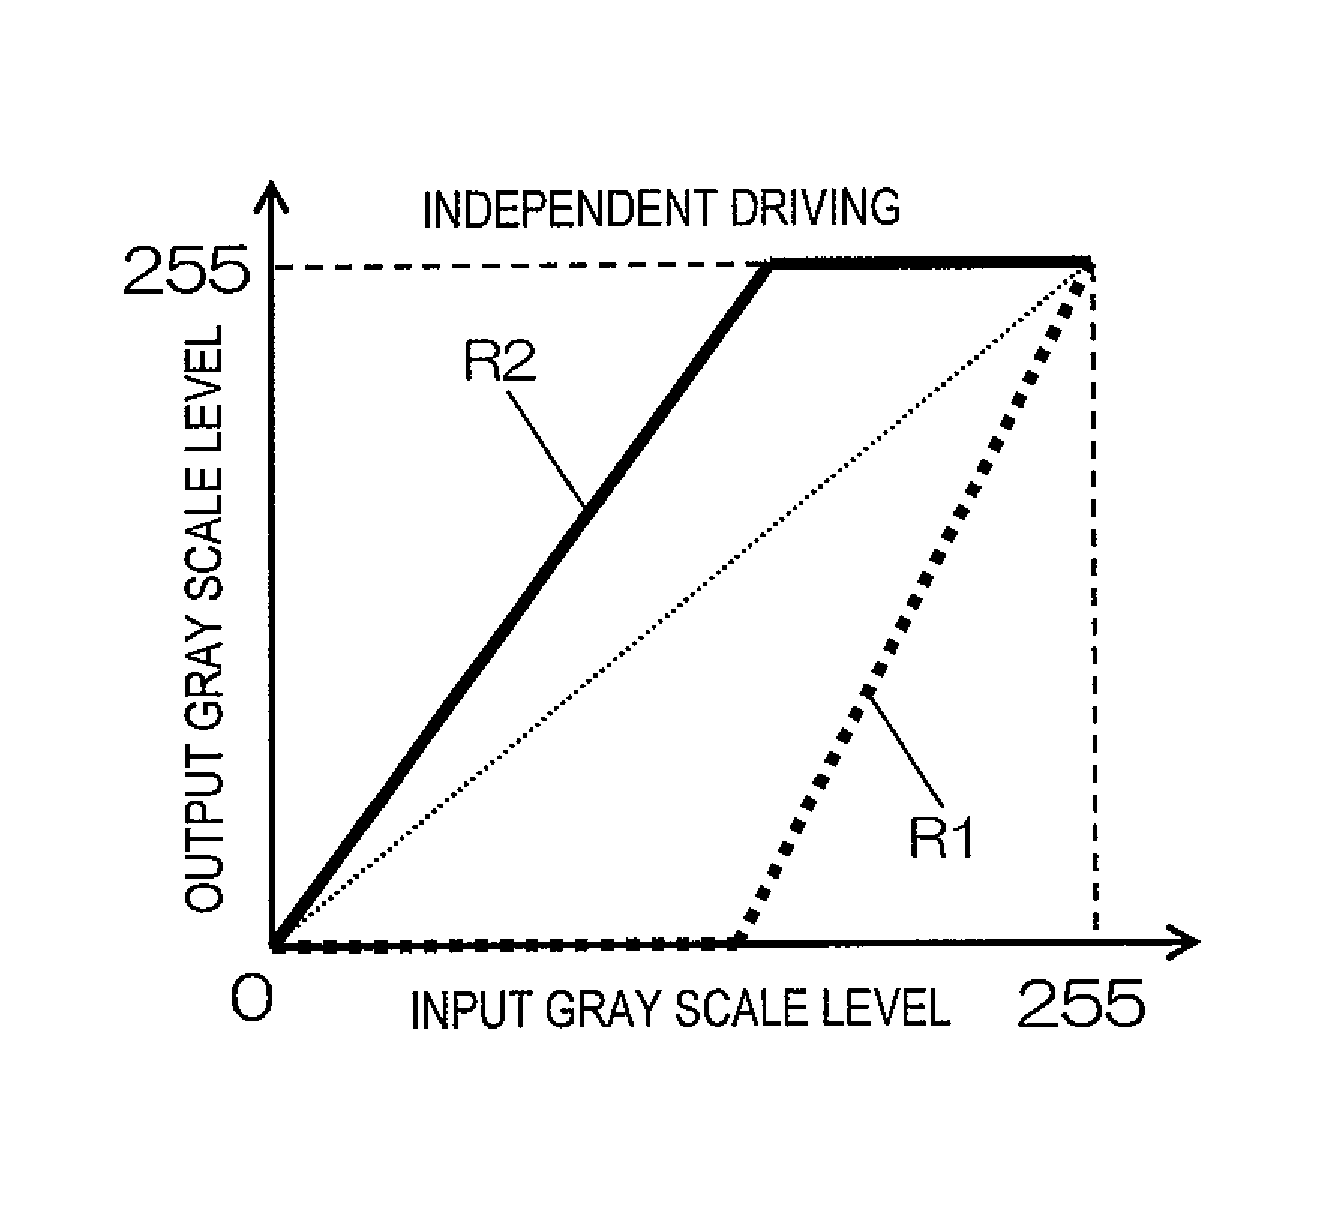 Multiple primary color liquid crystal display device and signal conversion circuit